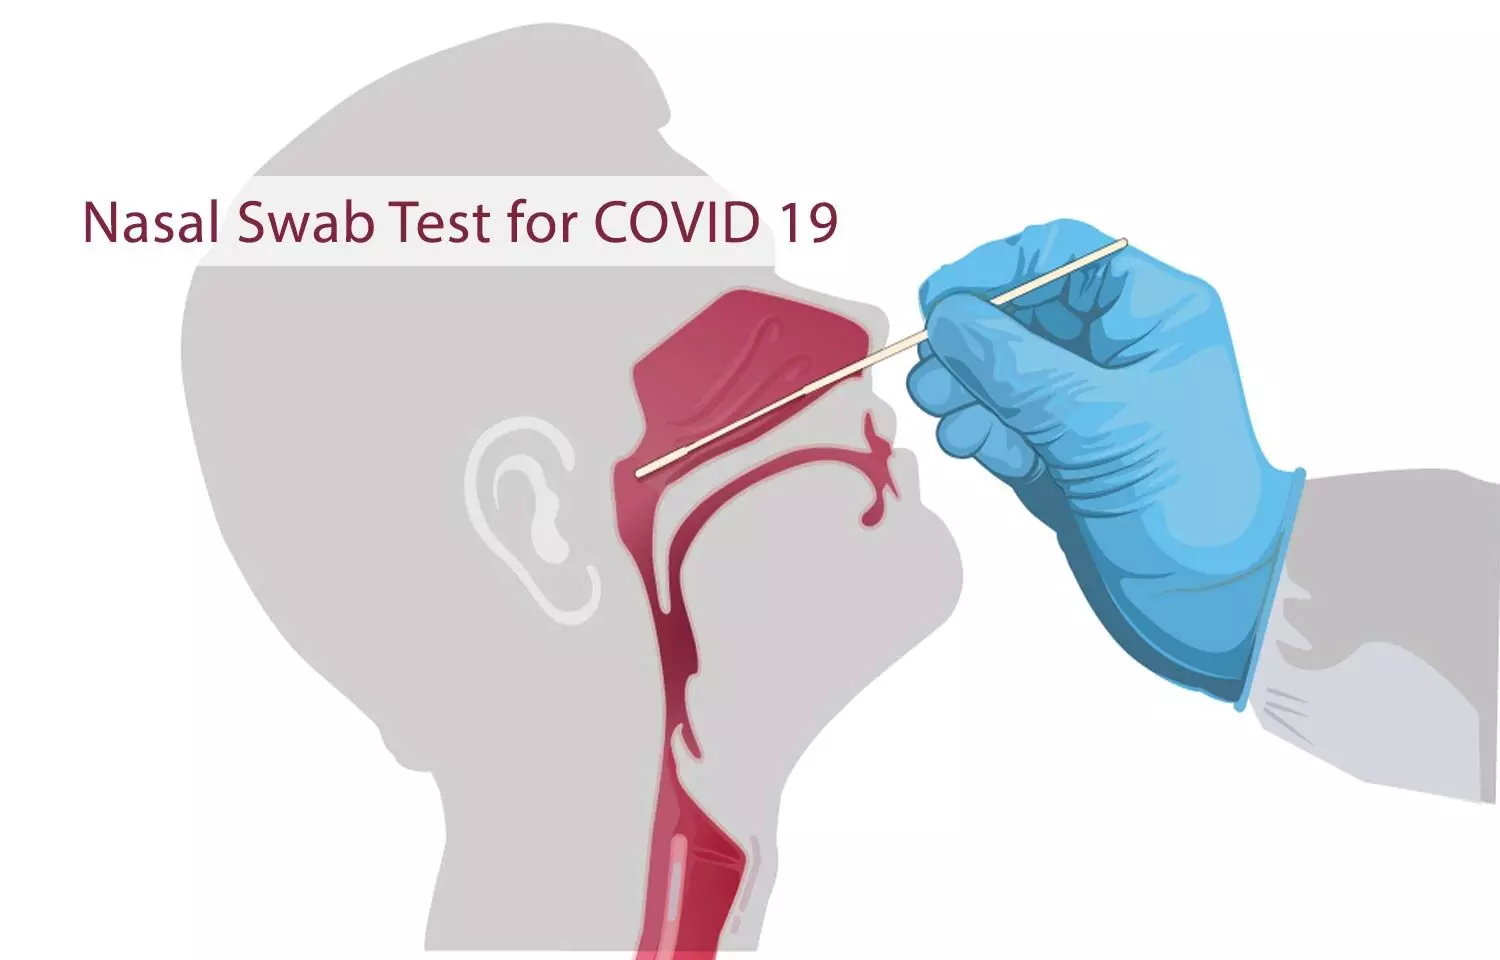 Rare case of Iatrogenic CSF leak after Nasal swab testing for COVID 19 reported